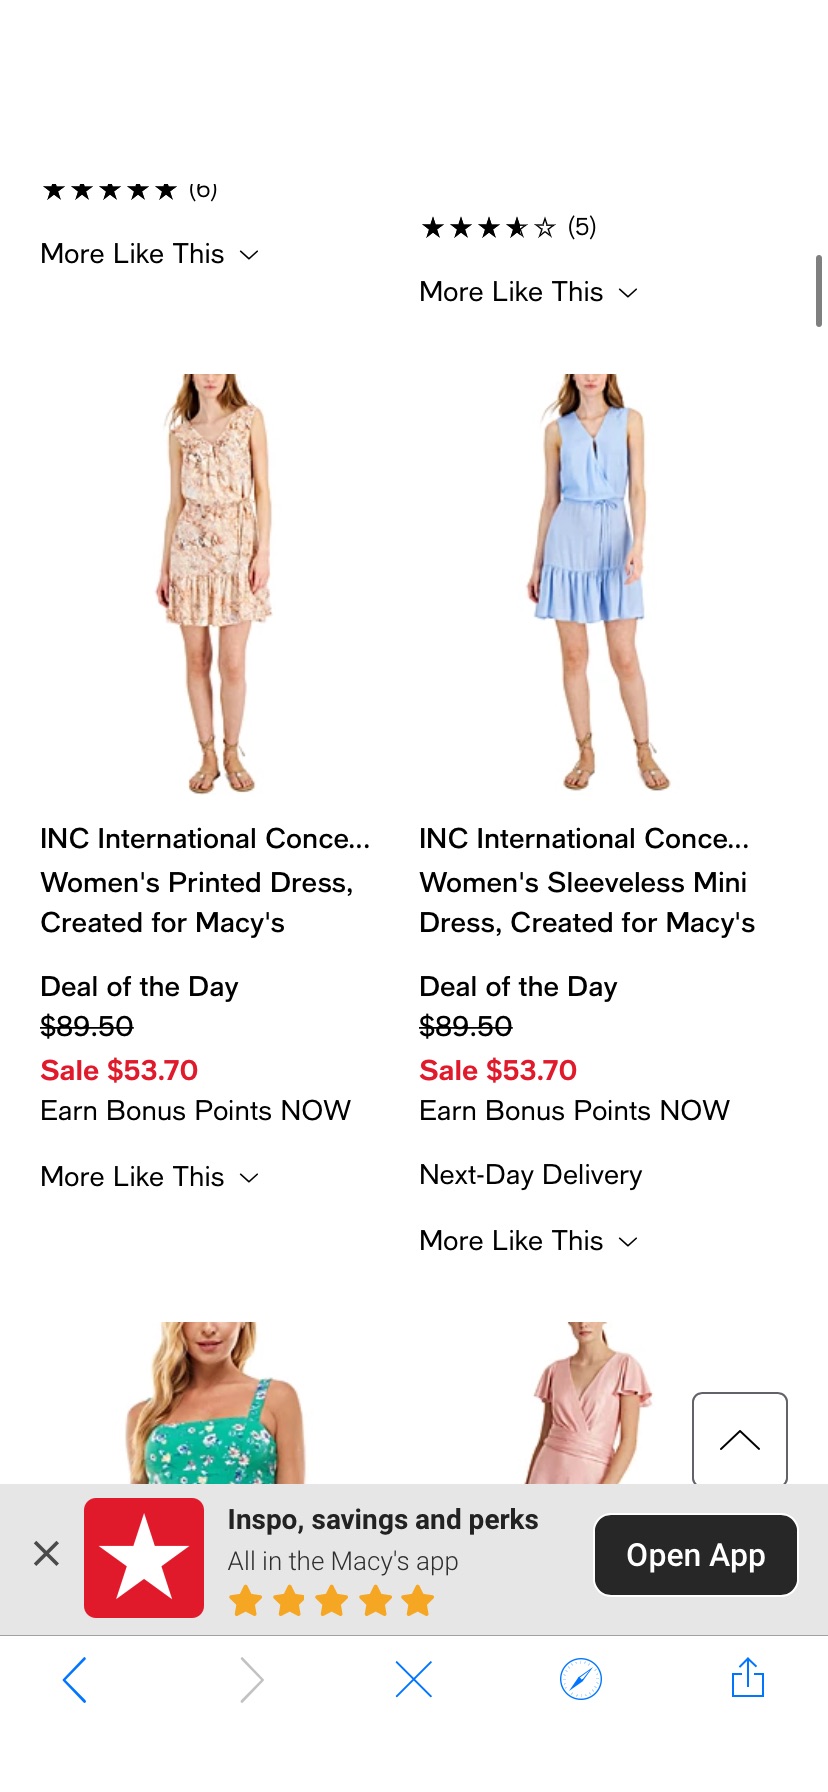 Dresses Deals of the Day - Macy's美裙专场低至二折